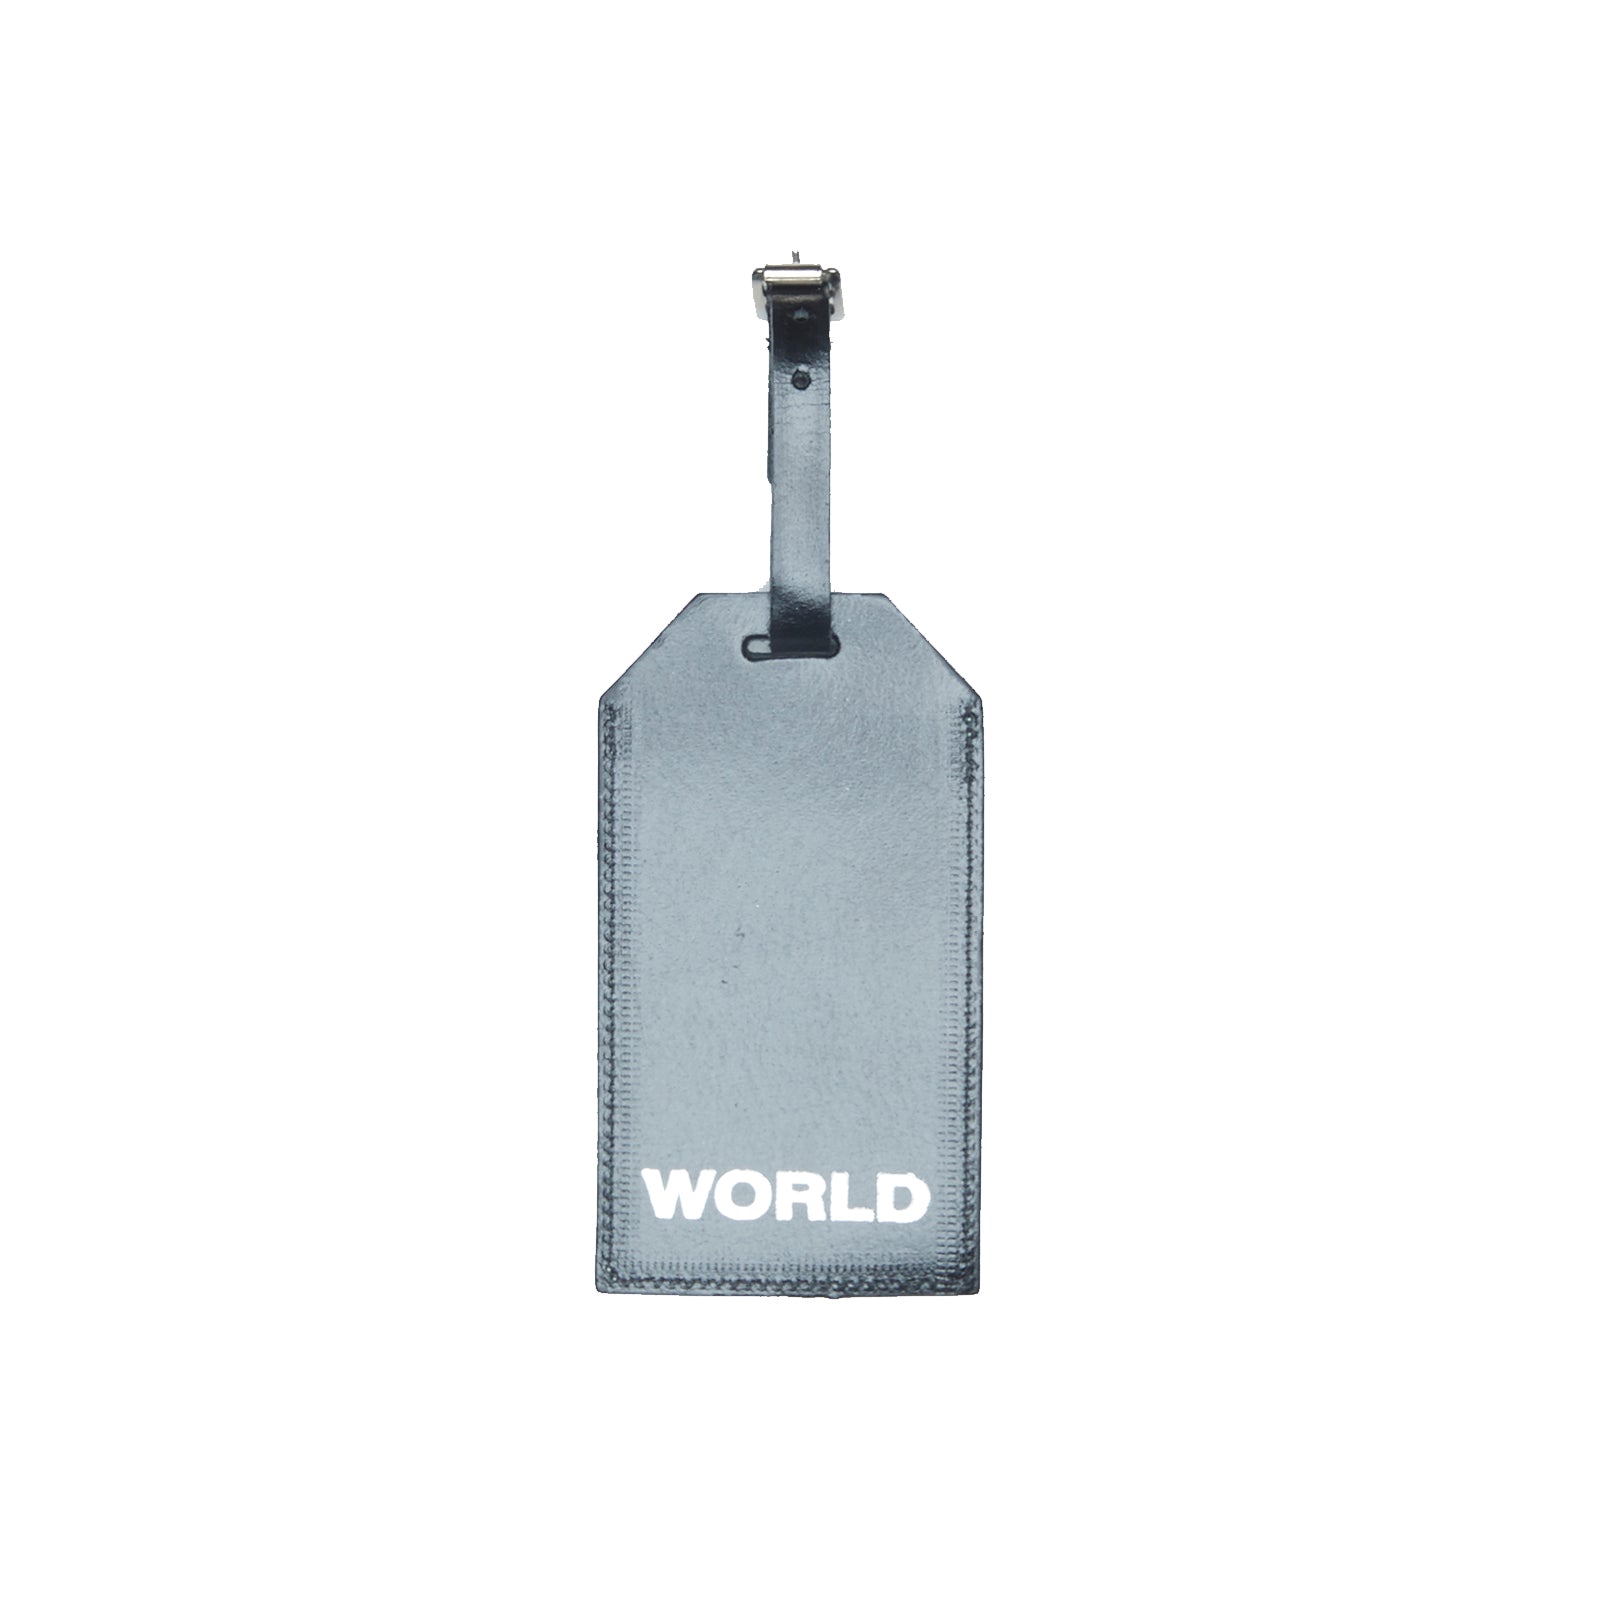 WORLD Liberty Leather Luggage Tag - Floral